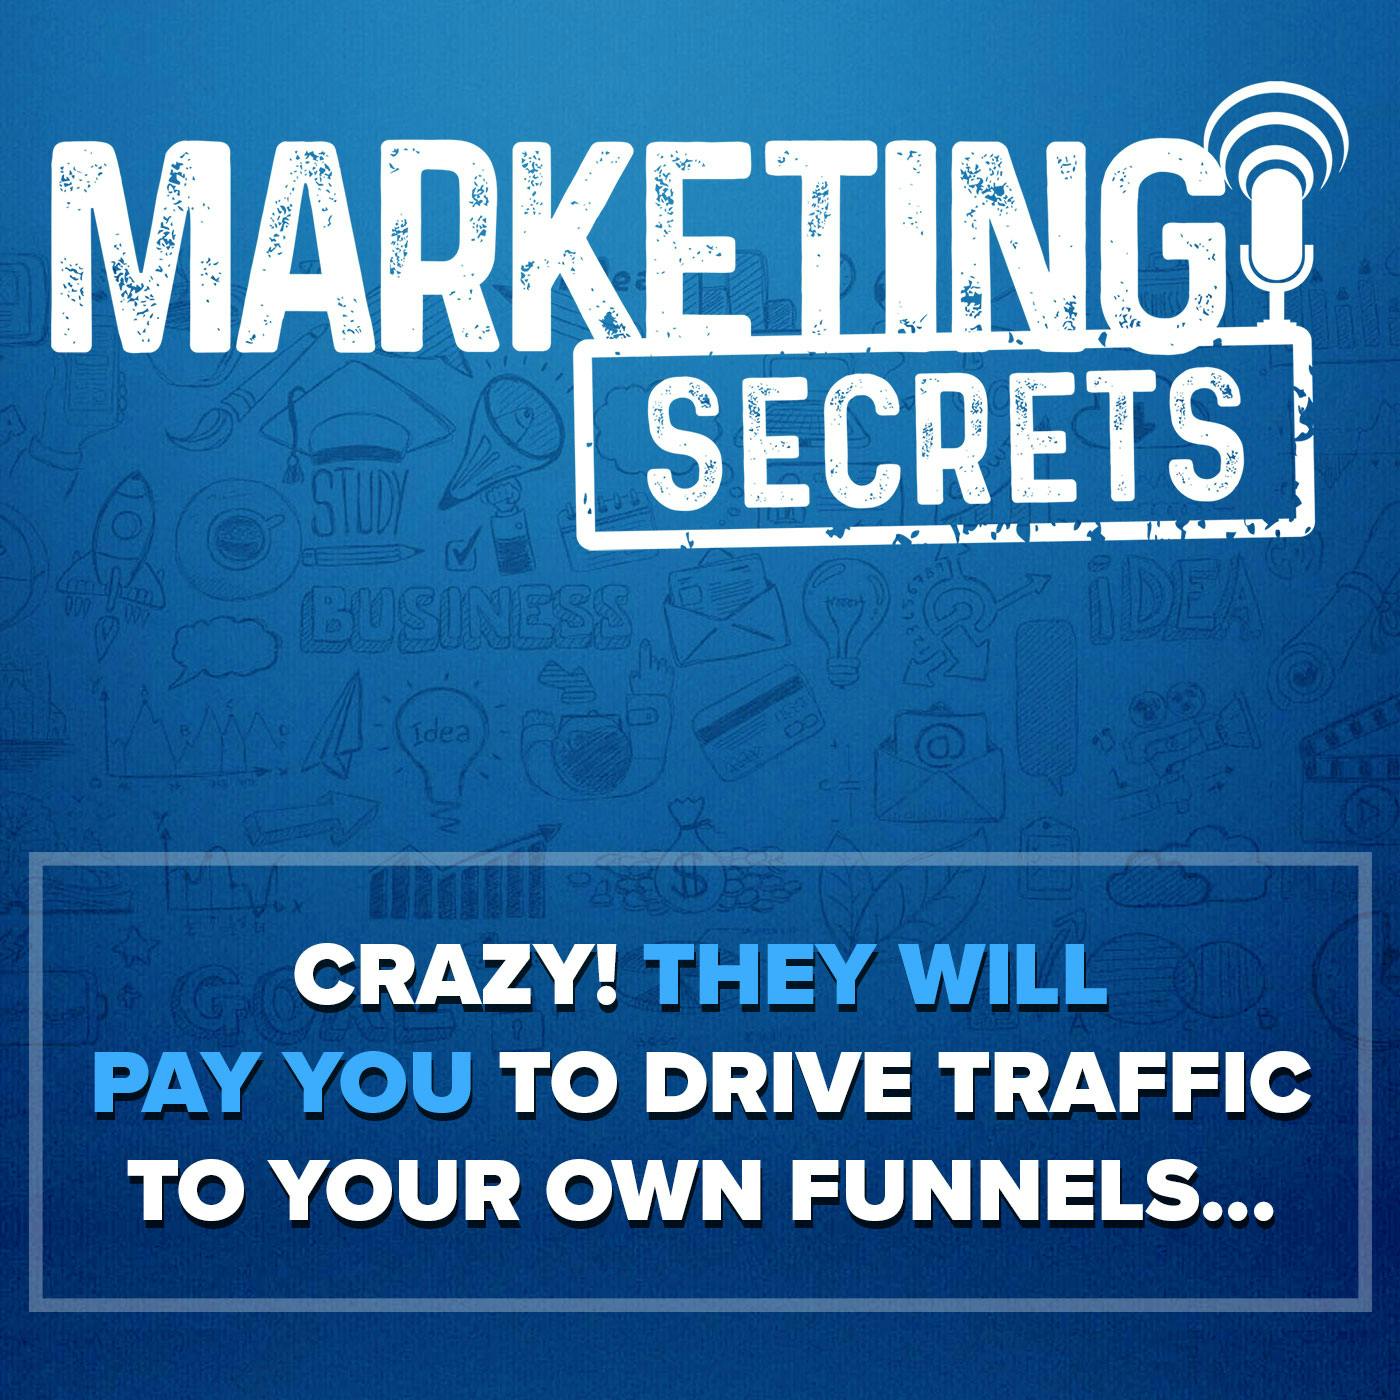 CRAZY! They Will Pay You To Drive Traffic To Your Own Funnels...